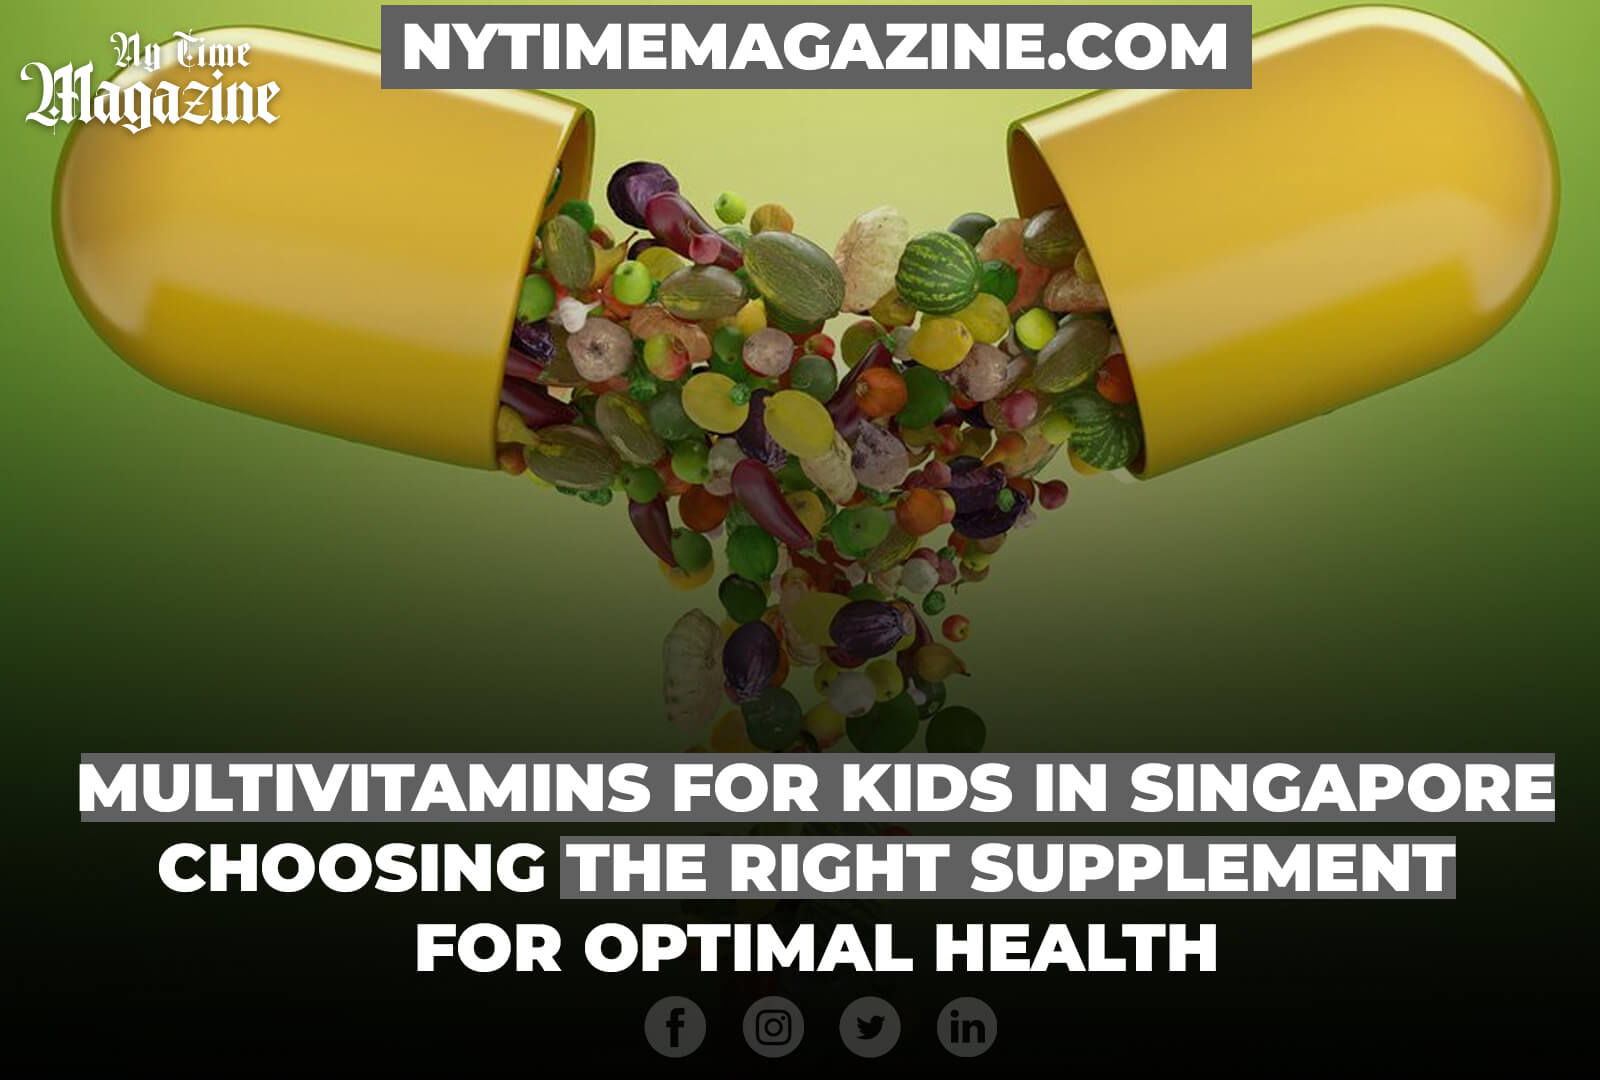 Multivitamins for Kids in Singapore: Choosing the Right Supplement for Optimal Health